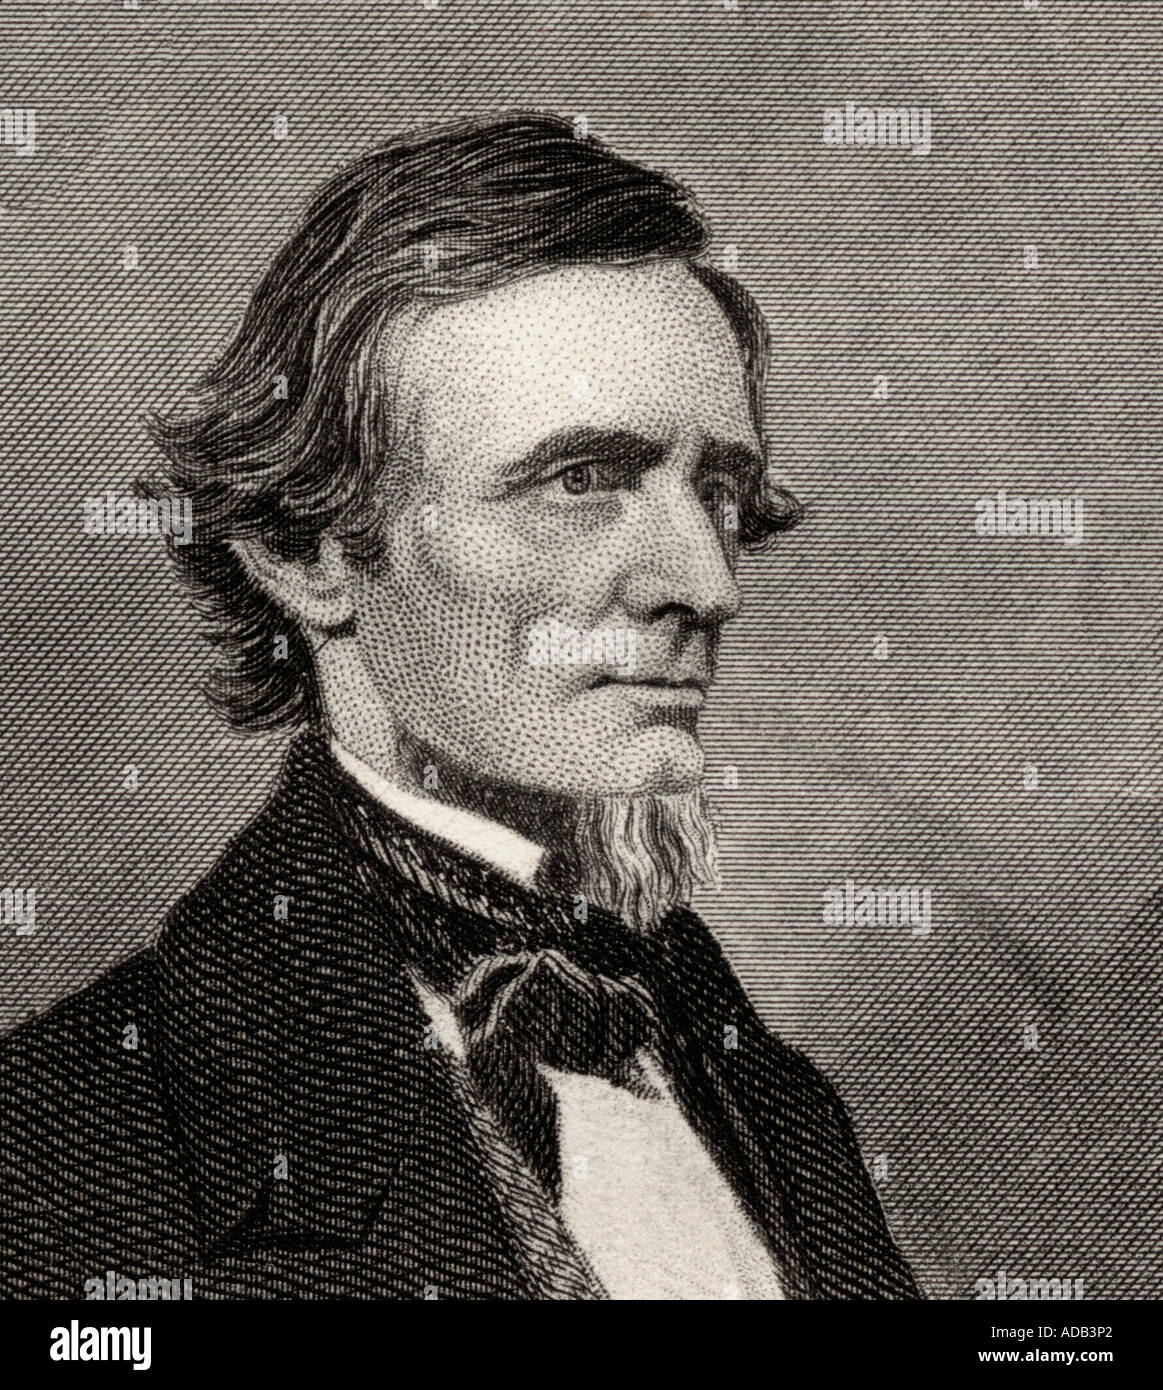 Jefferson Davis, 1808 - 1889. First and only President of the Confederate States of America during the American Civil War. Stock Photo